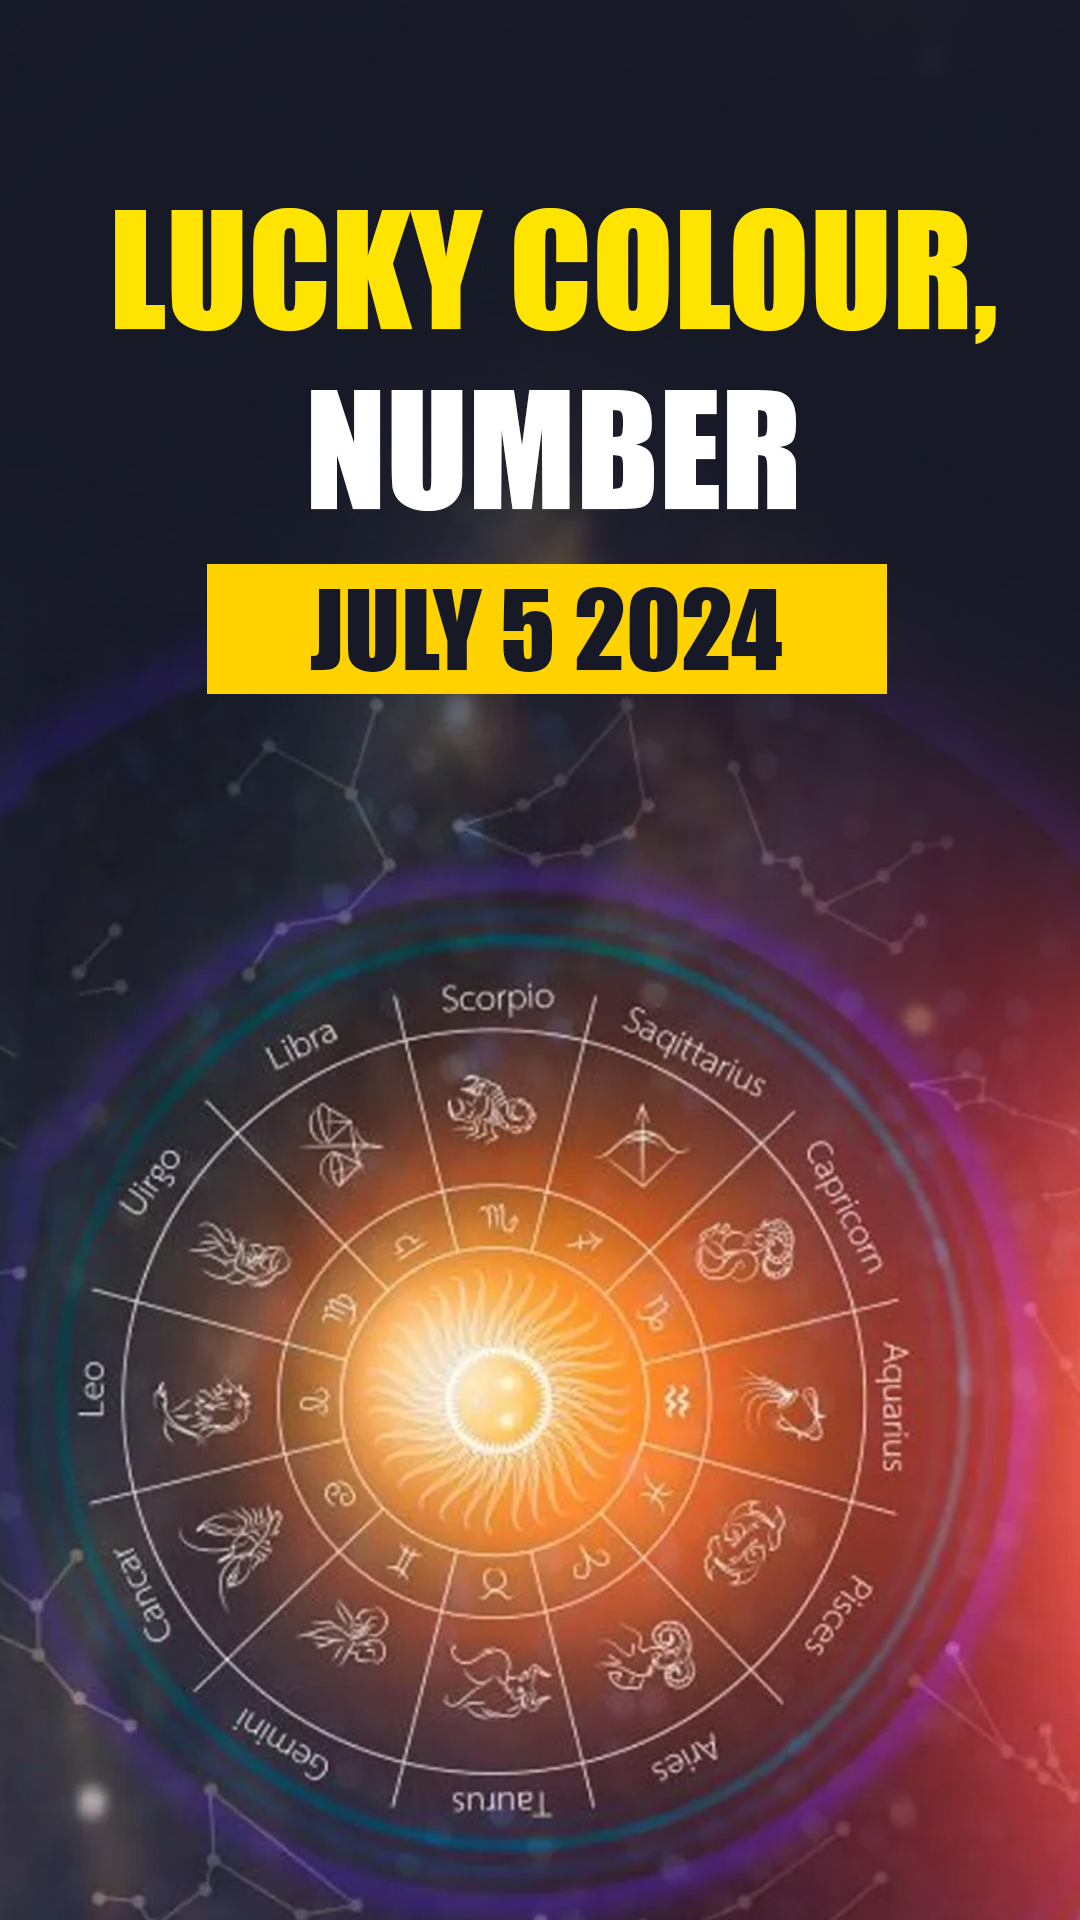 Know lucky colour, number of all zodiac signs in horoscope for July 5, 2024